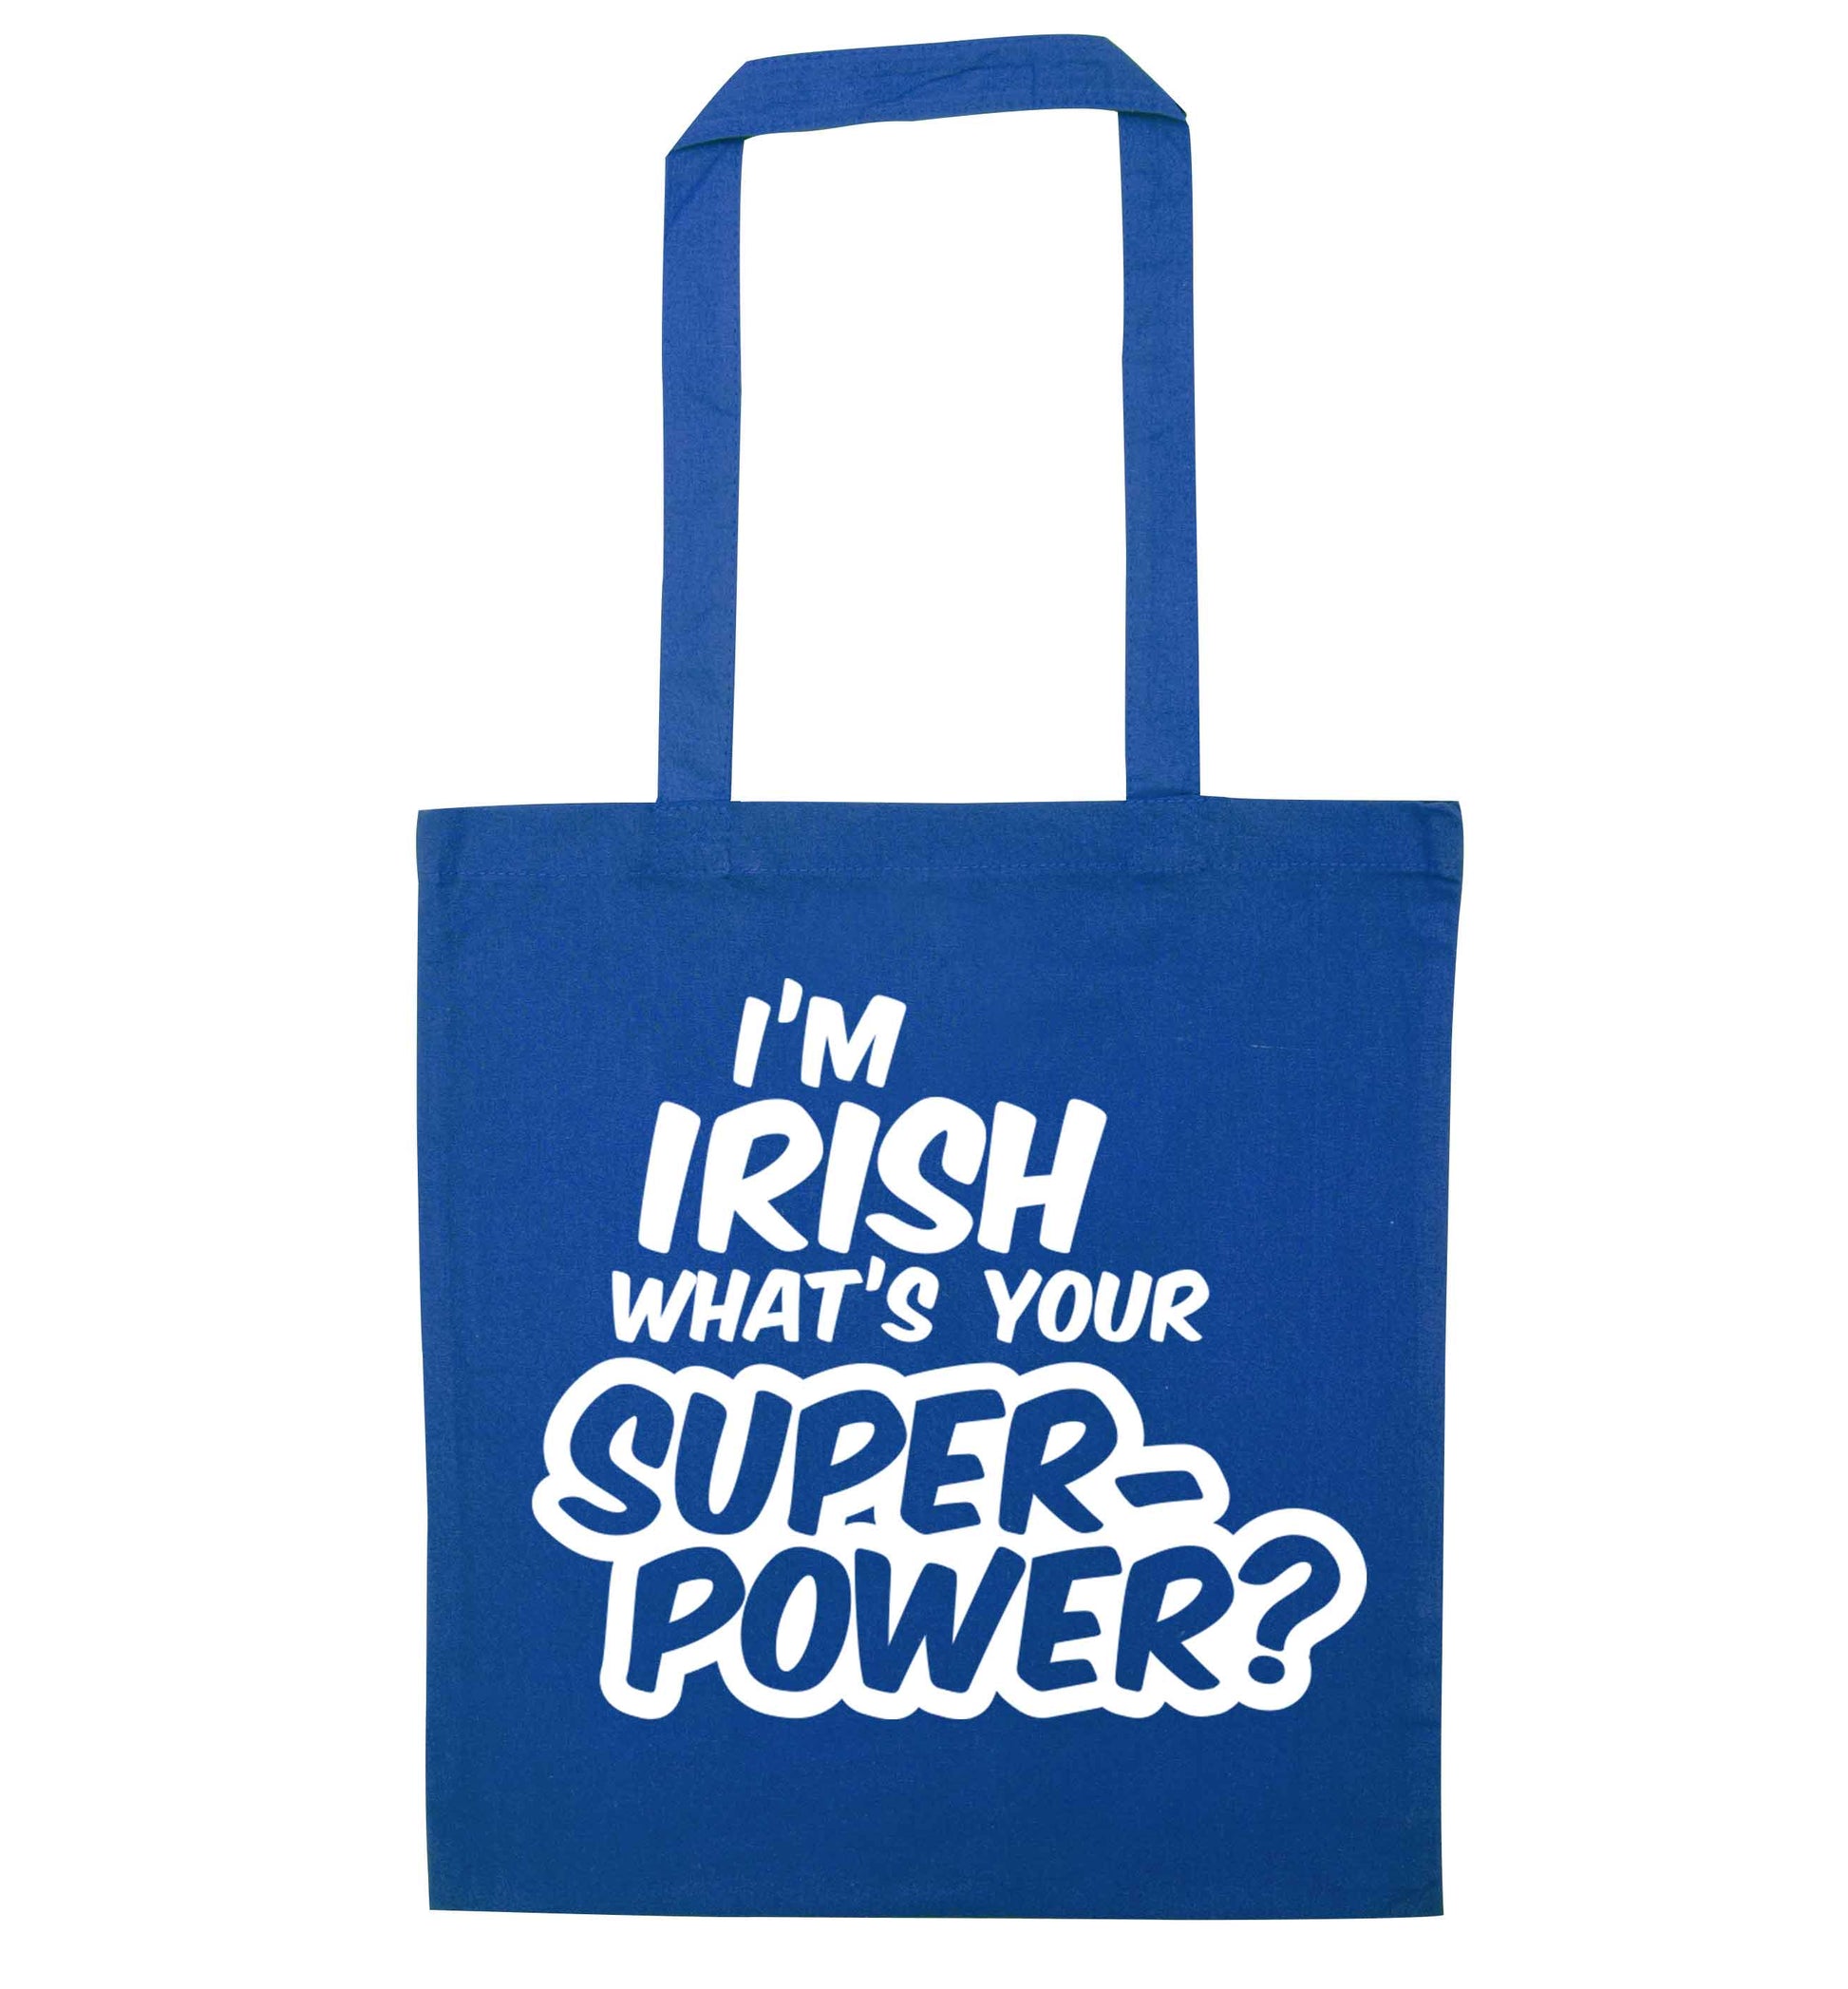 I'm Irish what's your superpower? blue tote bag